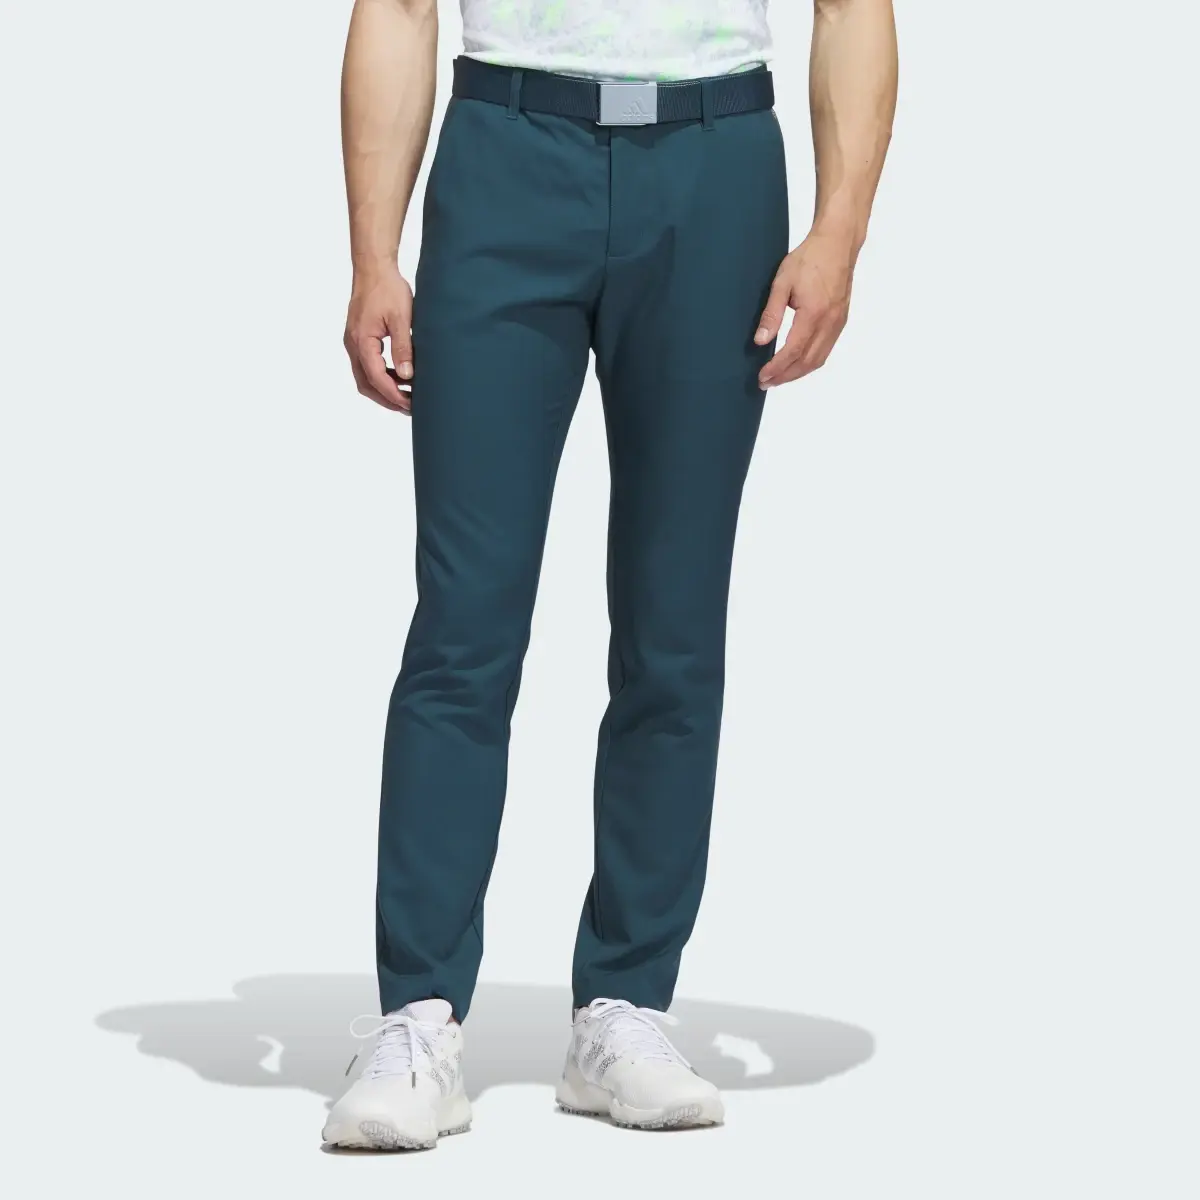 Adidas Ultimate365 Tapered Pants. 1